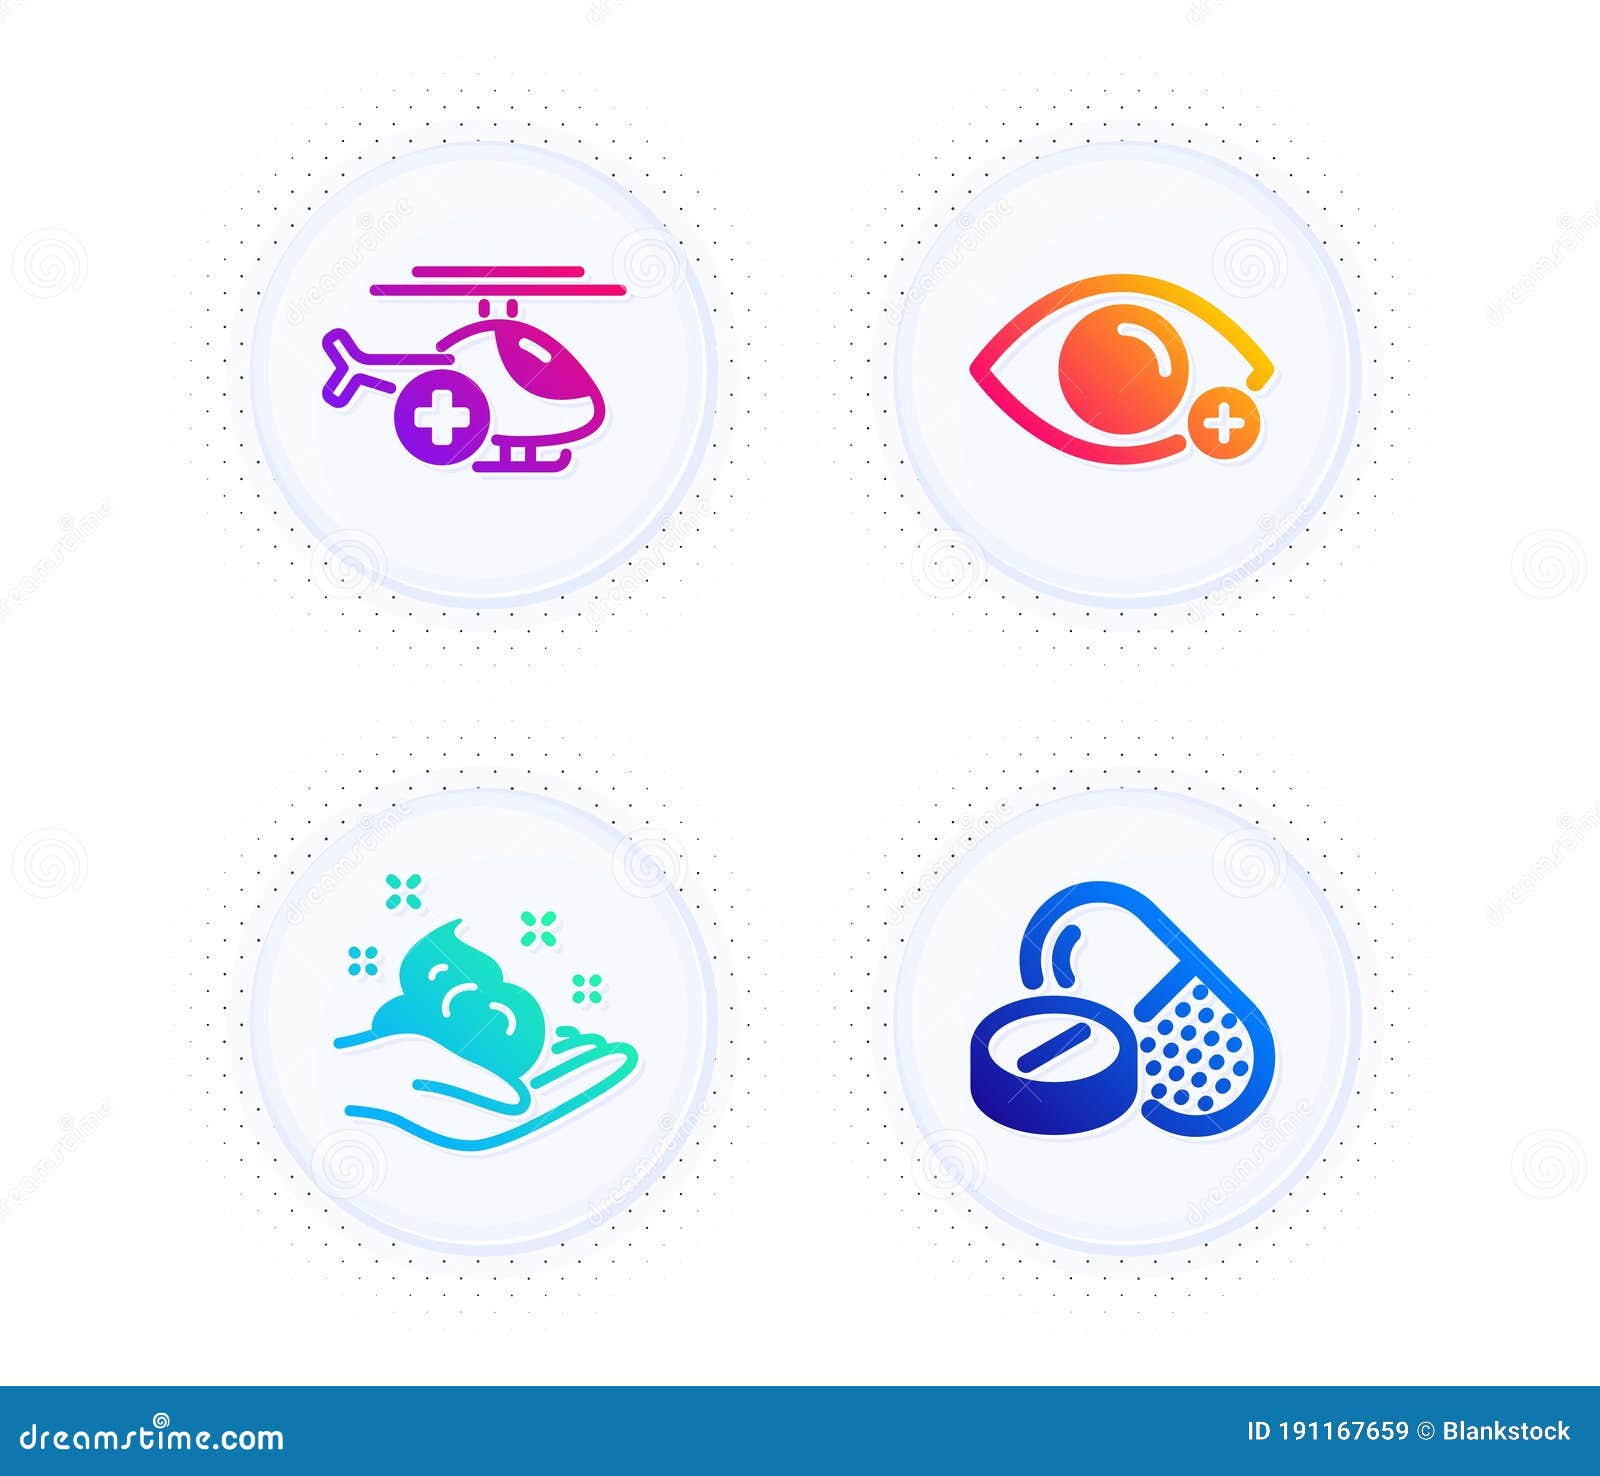 medical helicopter, skin care and farsightedness icons set. medical drugs sign. 